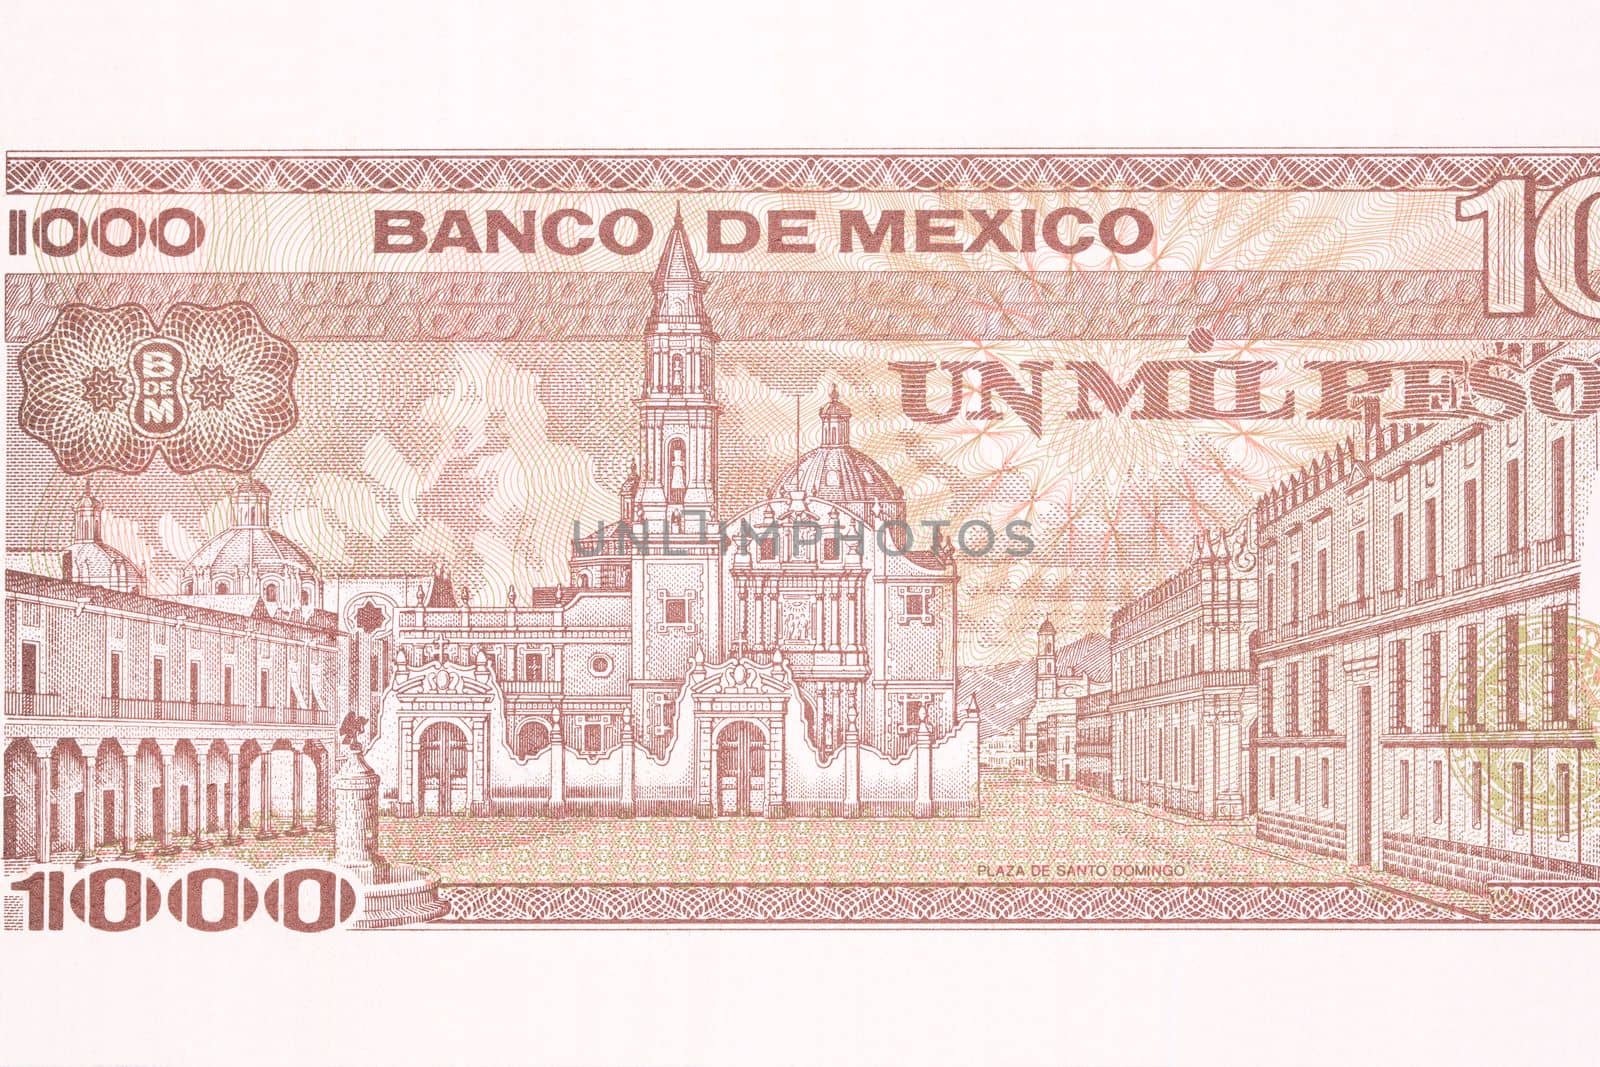 Plaza de Santo Domingo from old Mexican money  by johan10